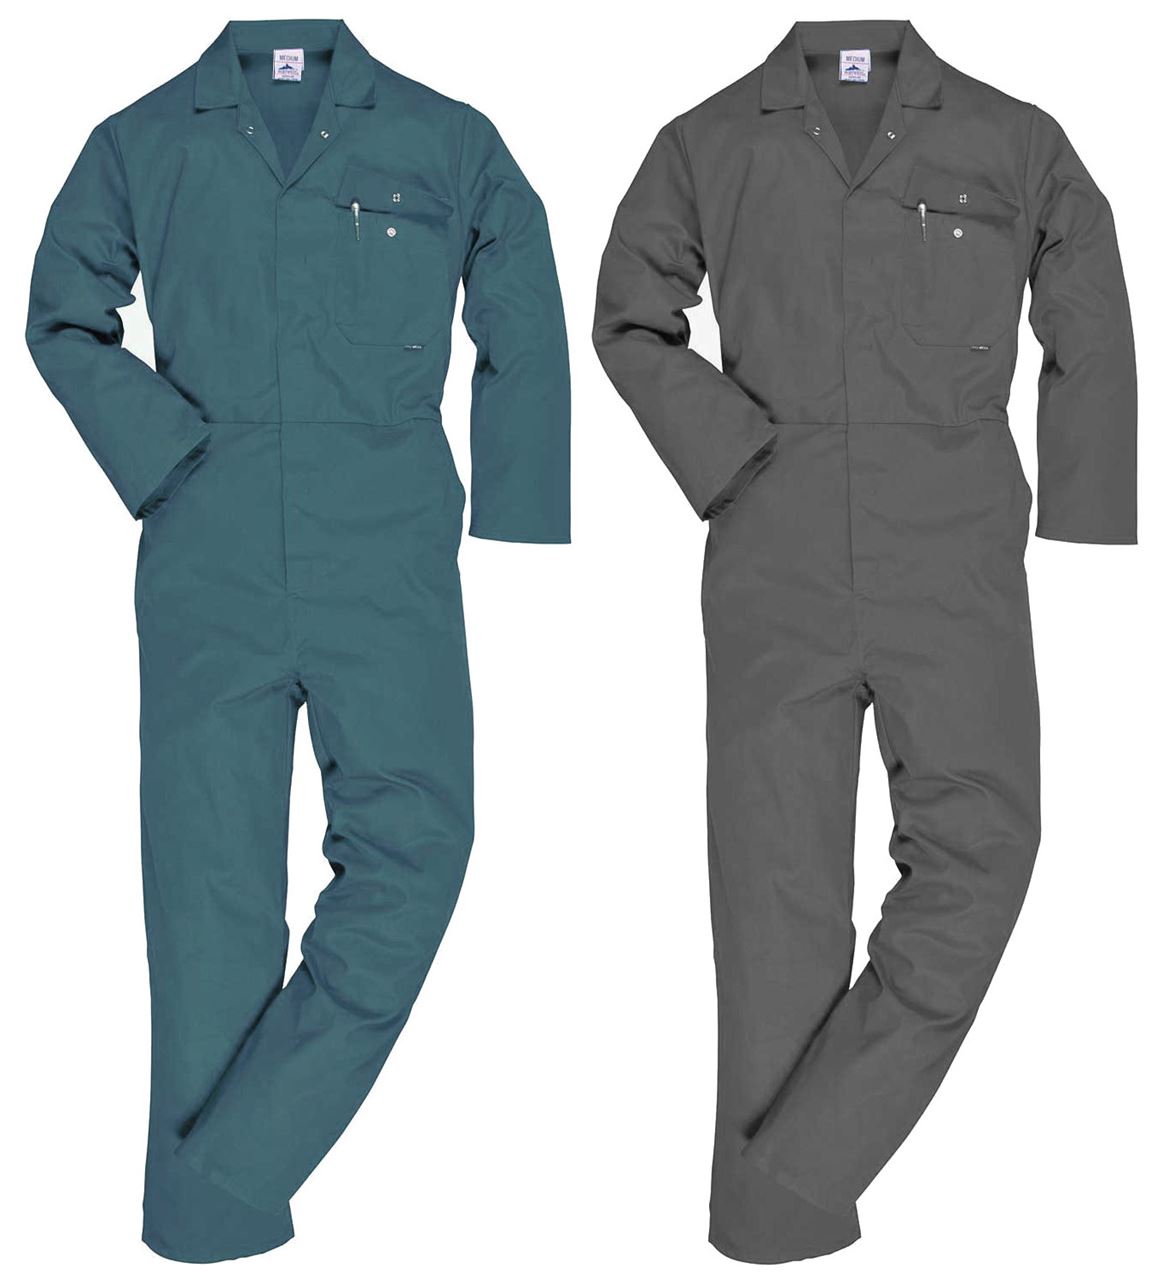 Portwest Classic Standard Polycotton Boilersuit Coverall C802 Green - Grey